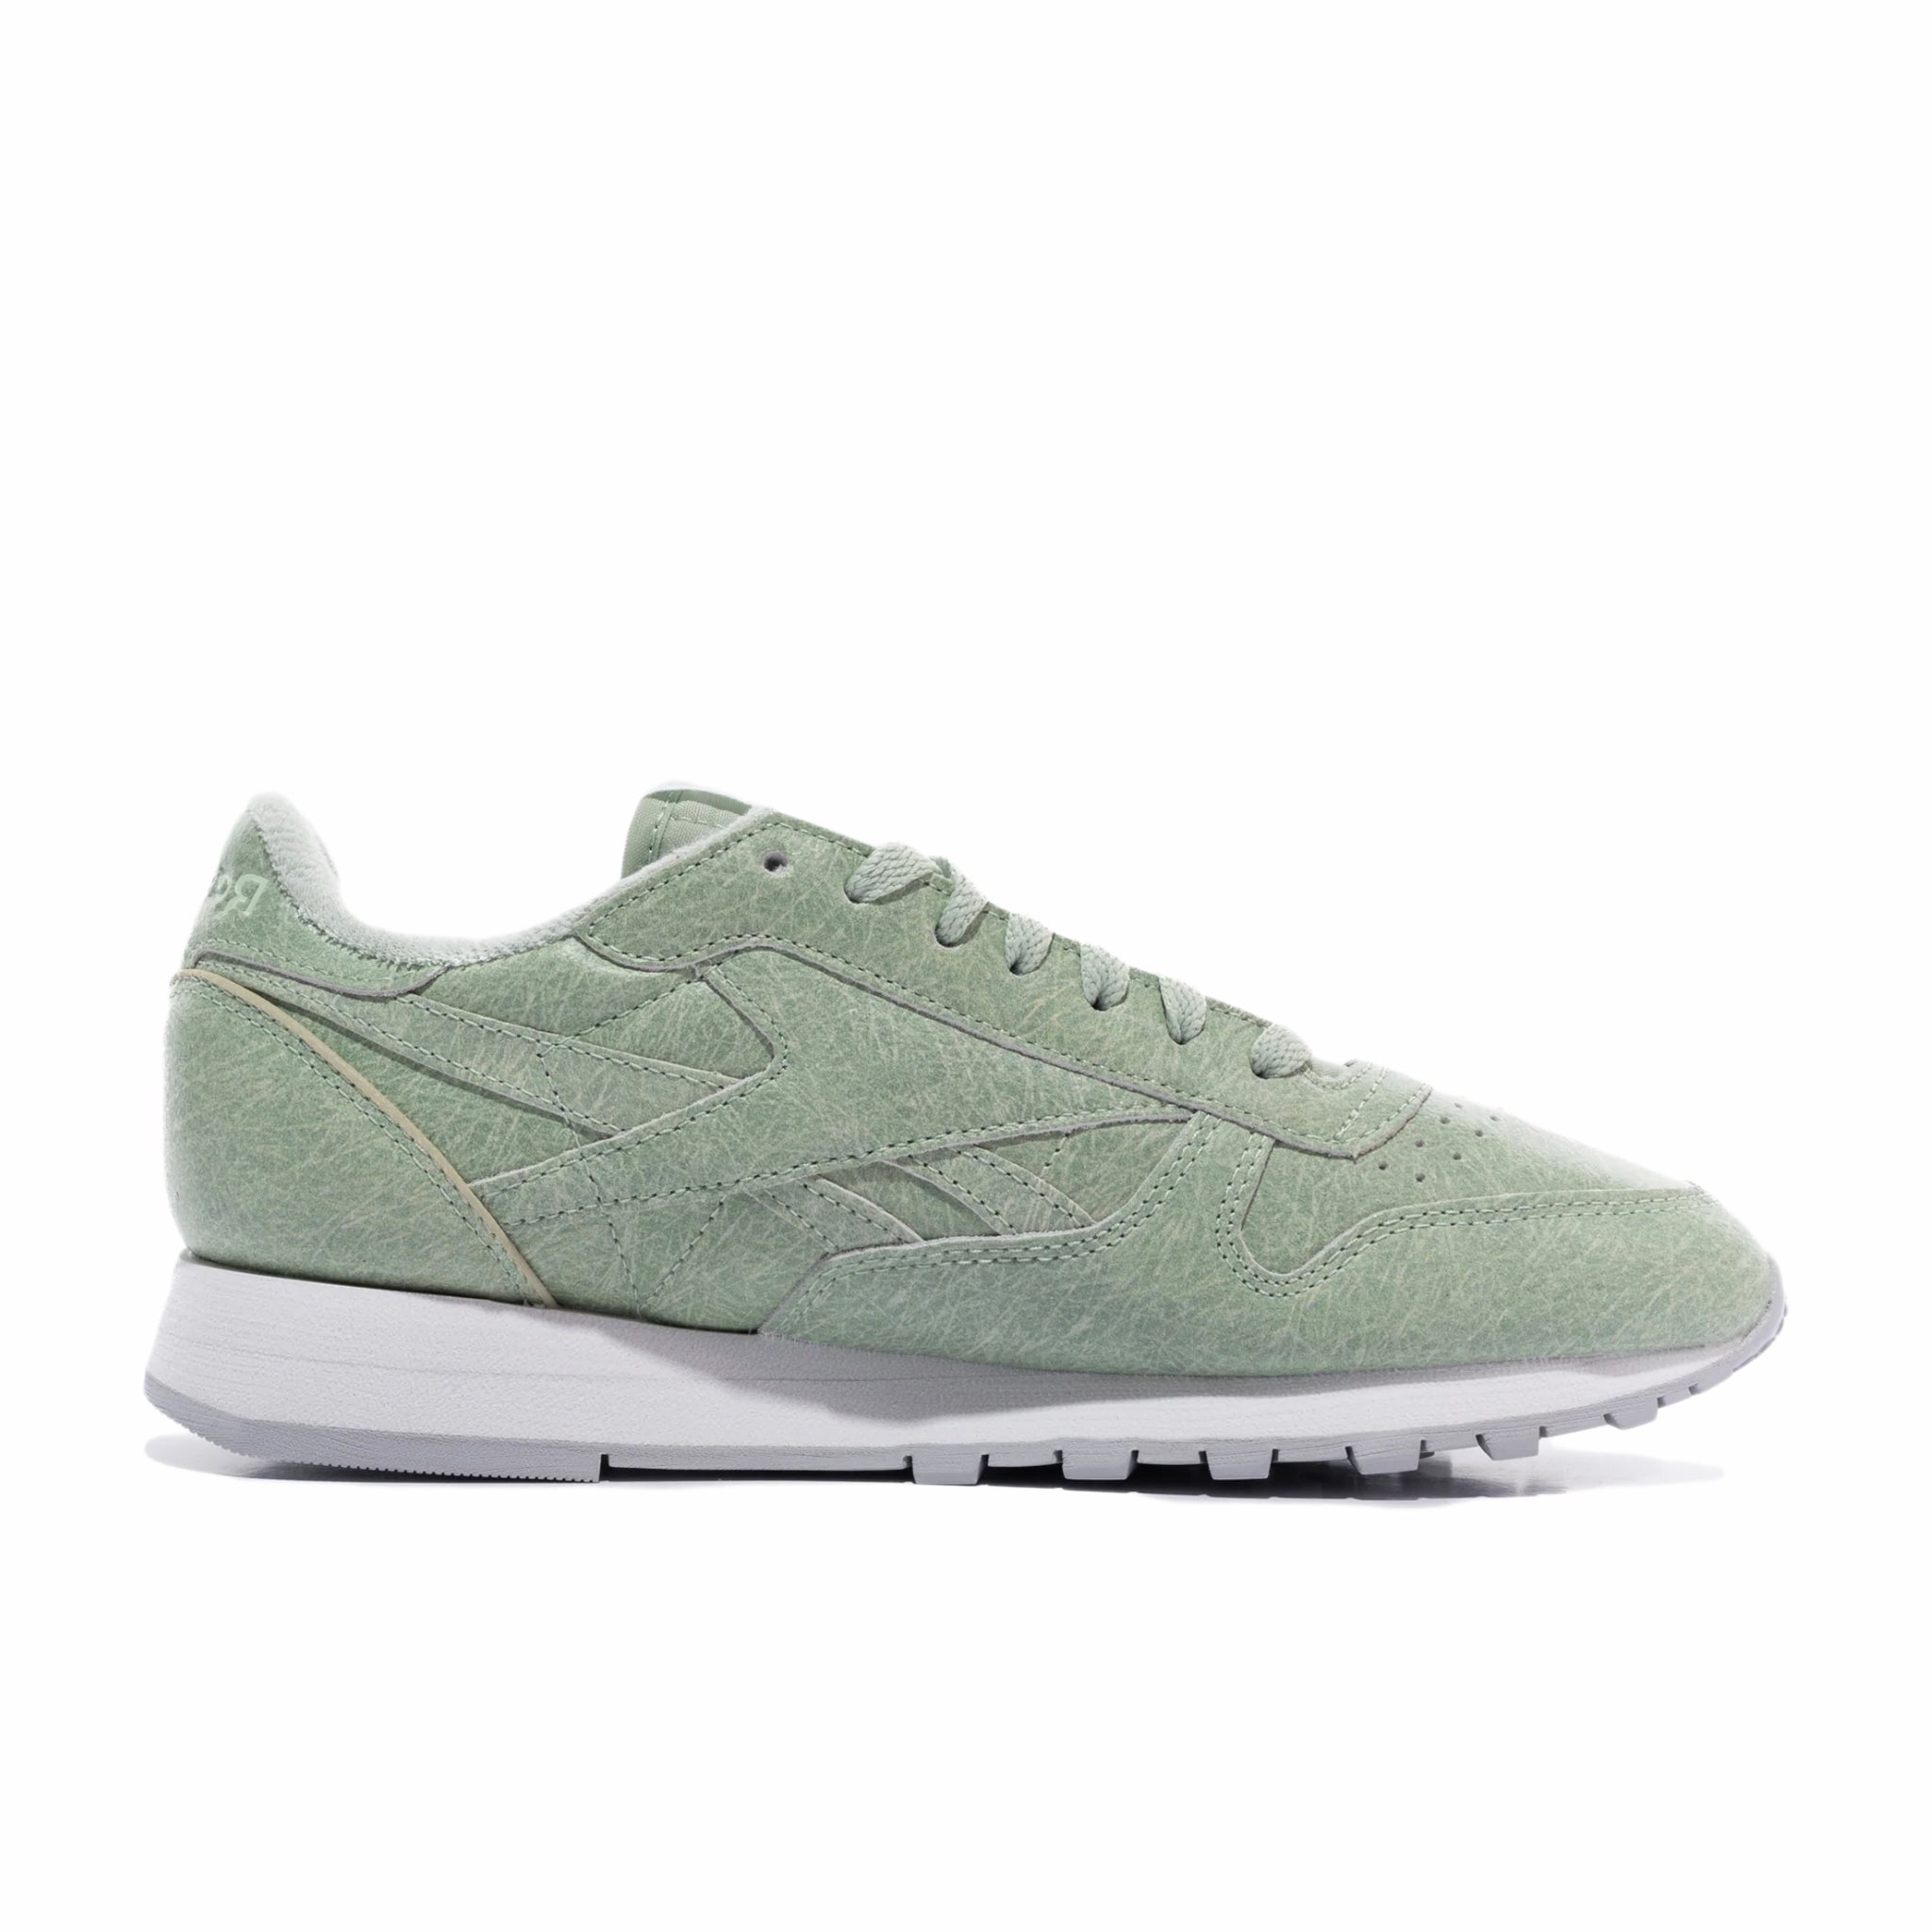 Reebok &quot;Eames&quot; Classic Leather (Light Sage/FTWR White/CDGRY2) - August Shop